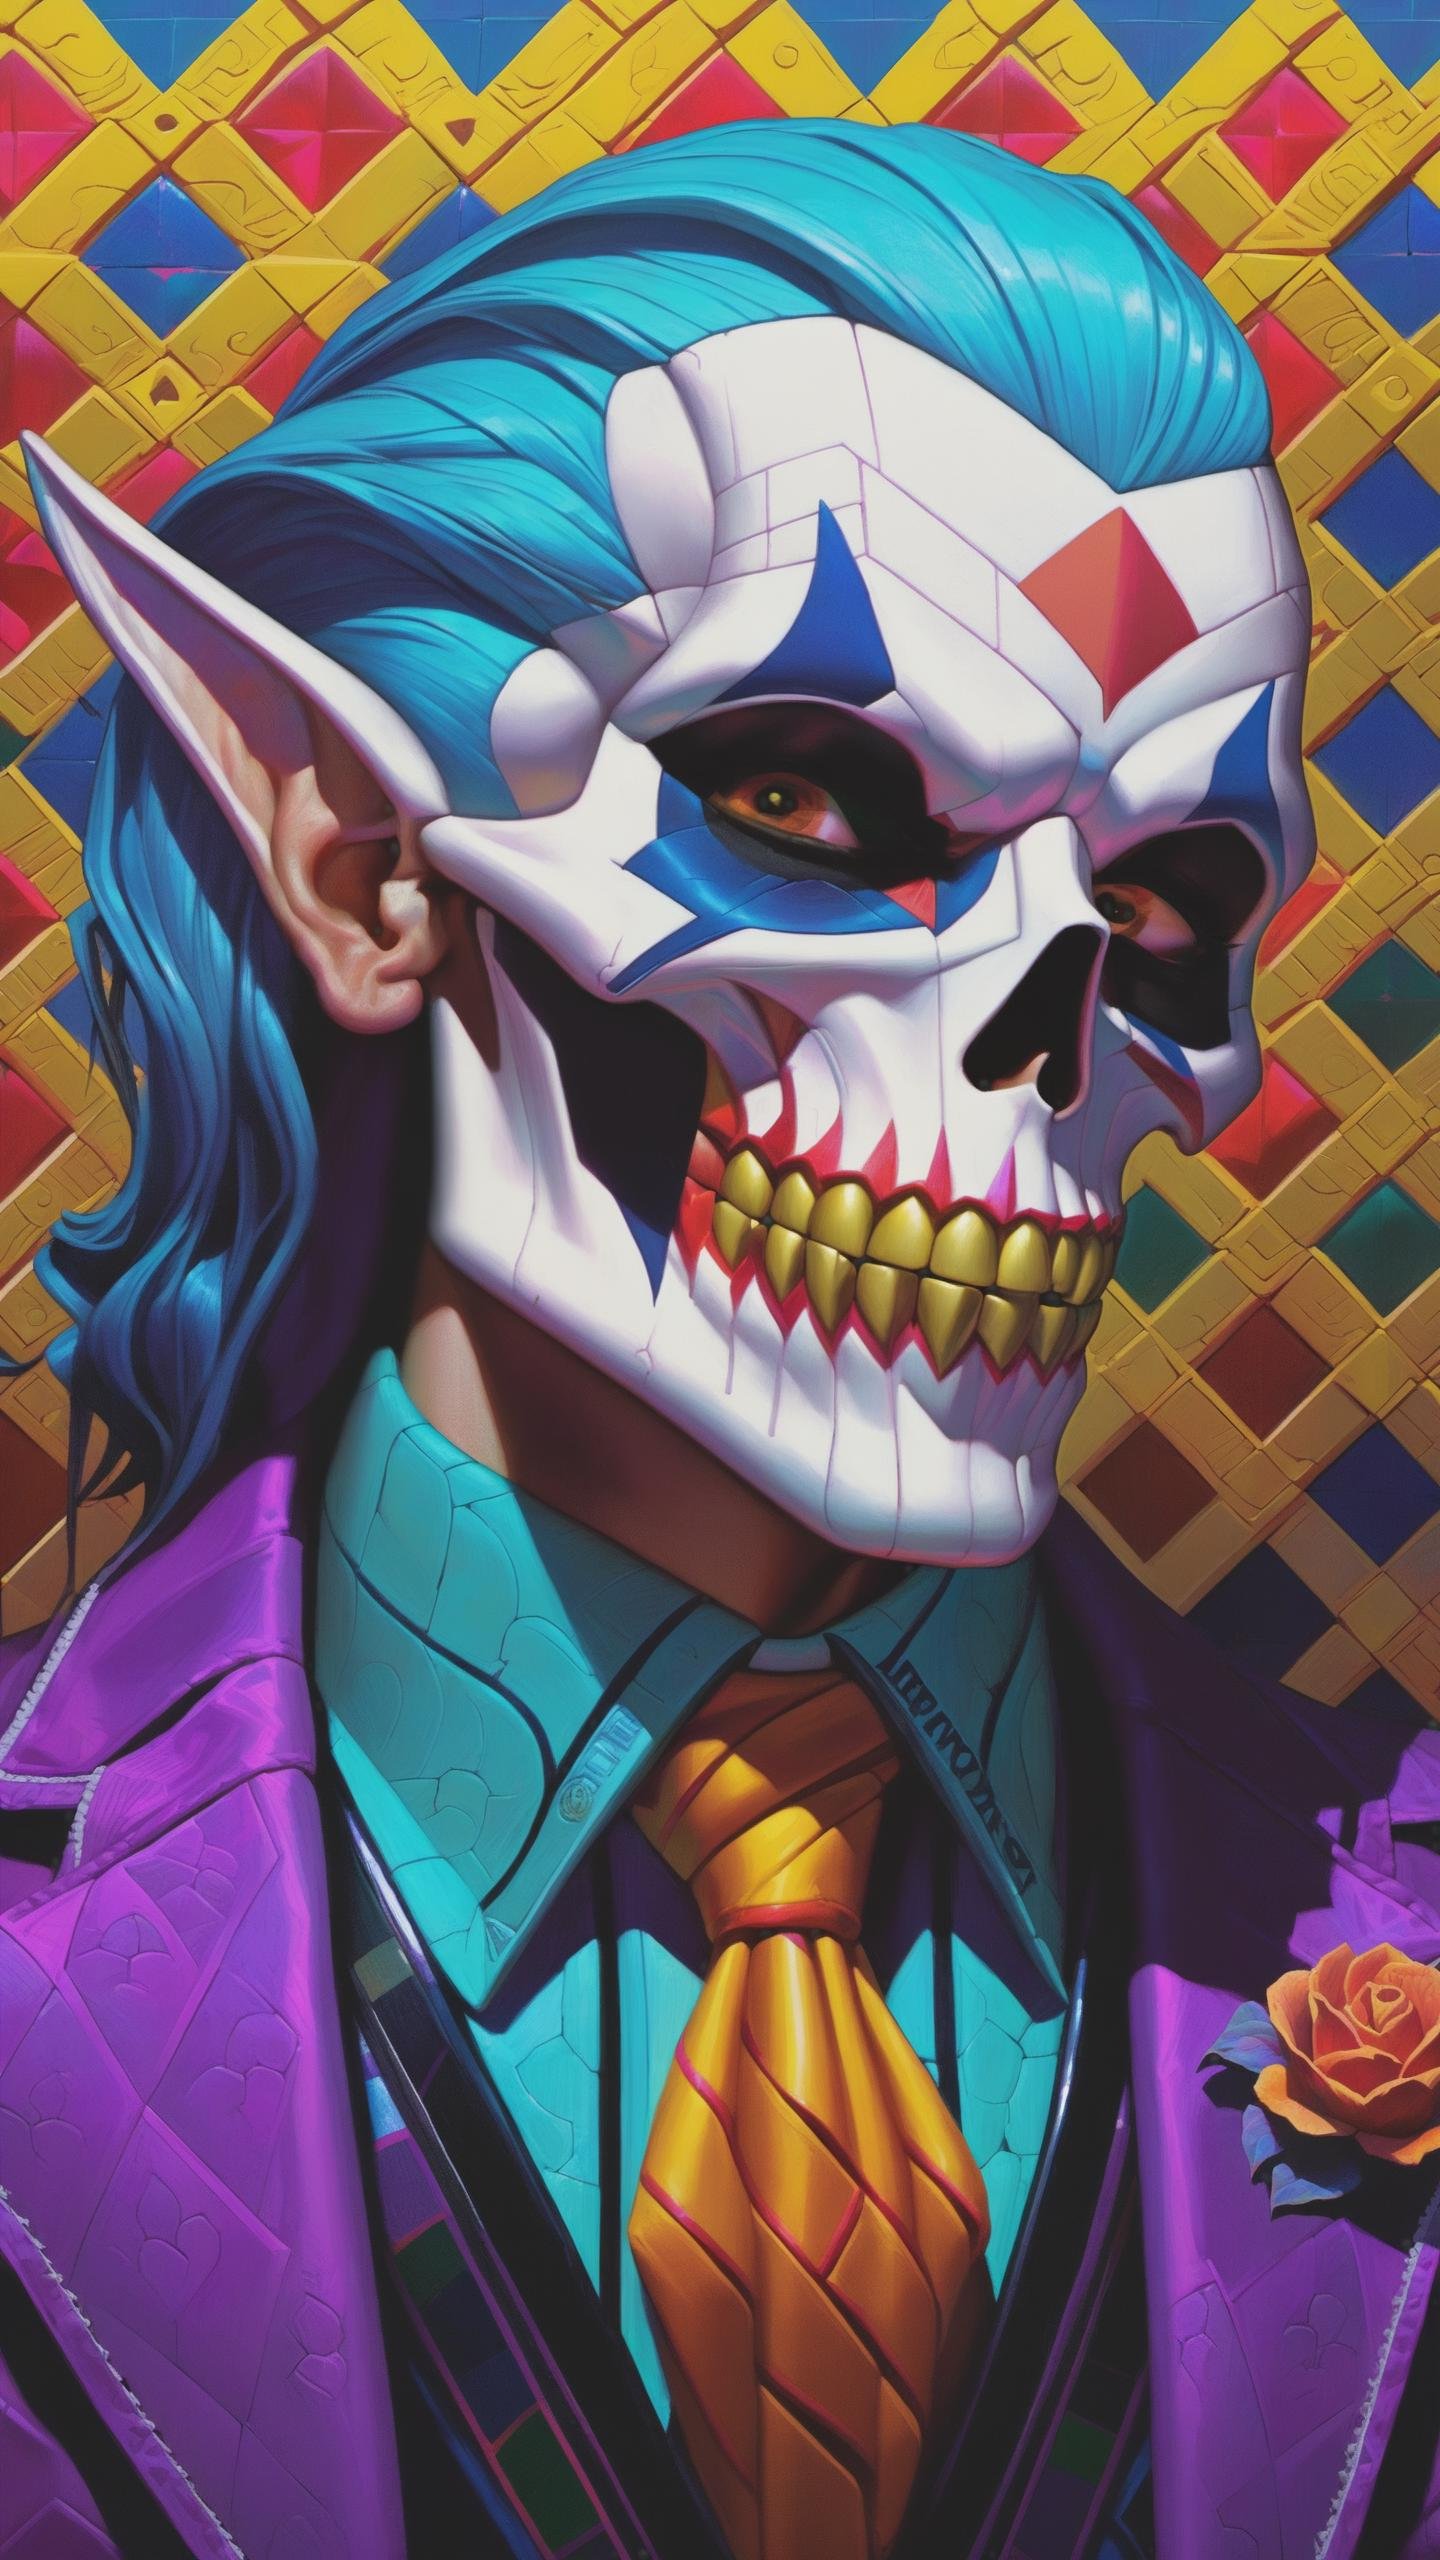 Hyper realistic art skull joker demon concept art portrait by Casey Weldon, Olga Kvasha, Miho Hirano, hyperdetailed intricately detailed gothic art trending on Artstation triadic colors Unreal Engine 5 detailed matte painting, deep color, fantastical, intricate detail, splash screen, complementary colors, fantasy concept art, 8k resolution, gothic DeviantArt masterpiece . Extremely high-resolution details, photographic, realism pushed to extreme, fine texture, incredibly lifelike